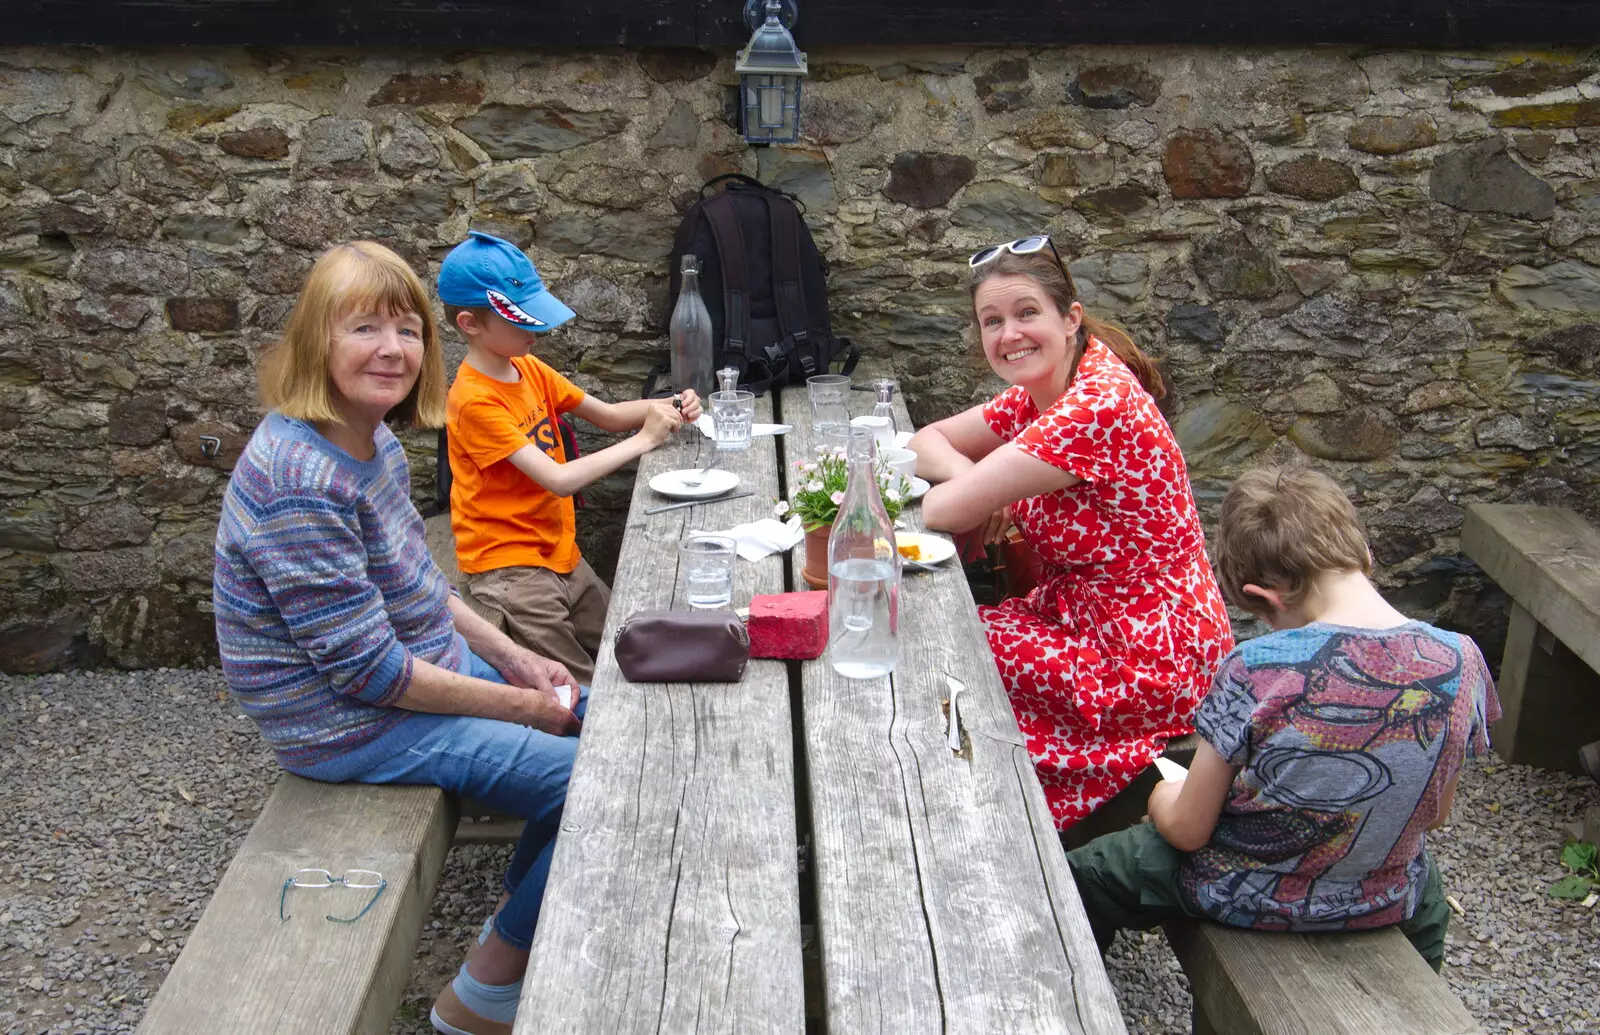 The gang, from Chagford Lido and a Trip to Parke, Bovey Tracey, Devon - 25th May 2019